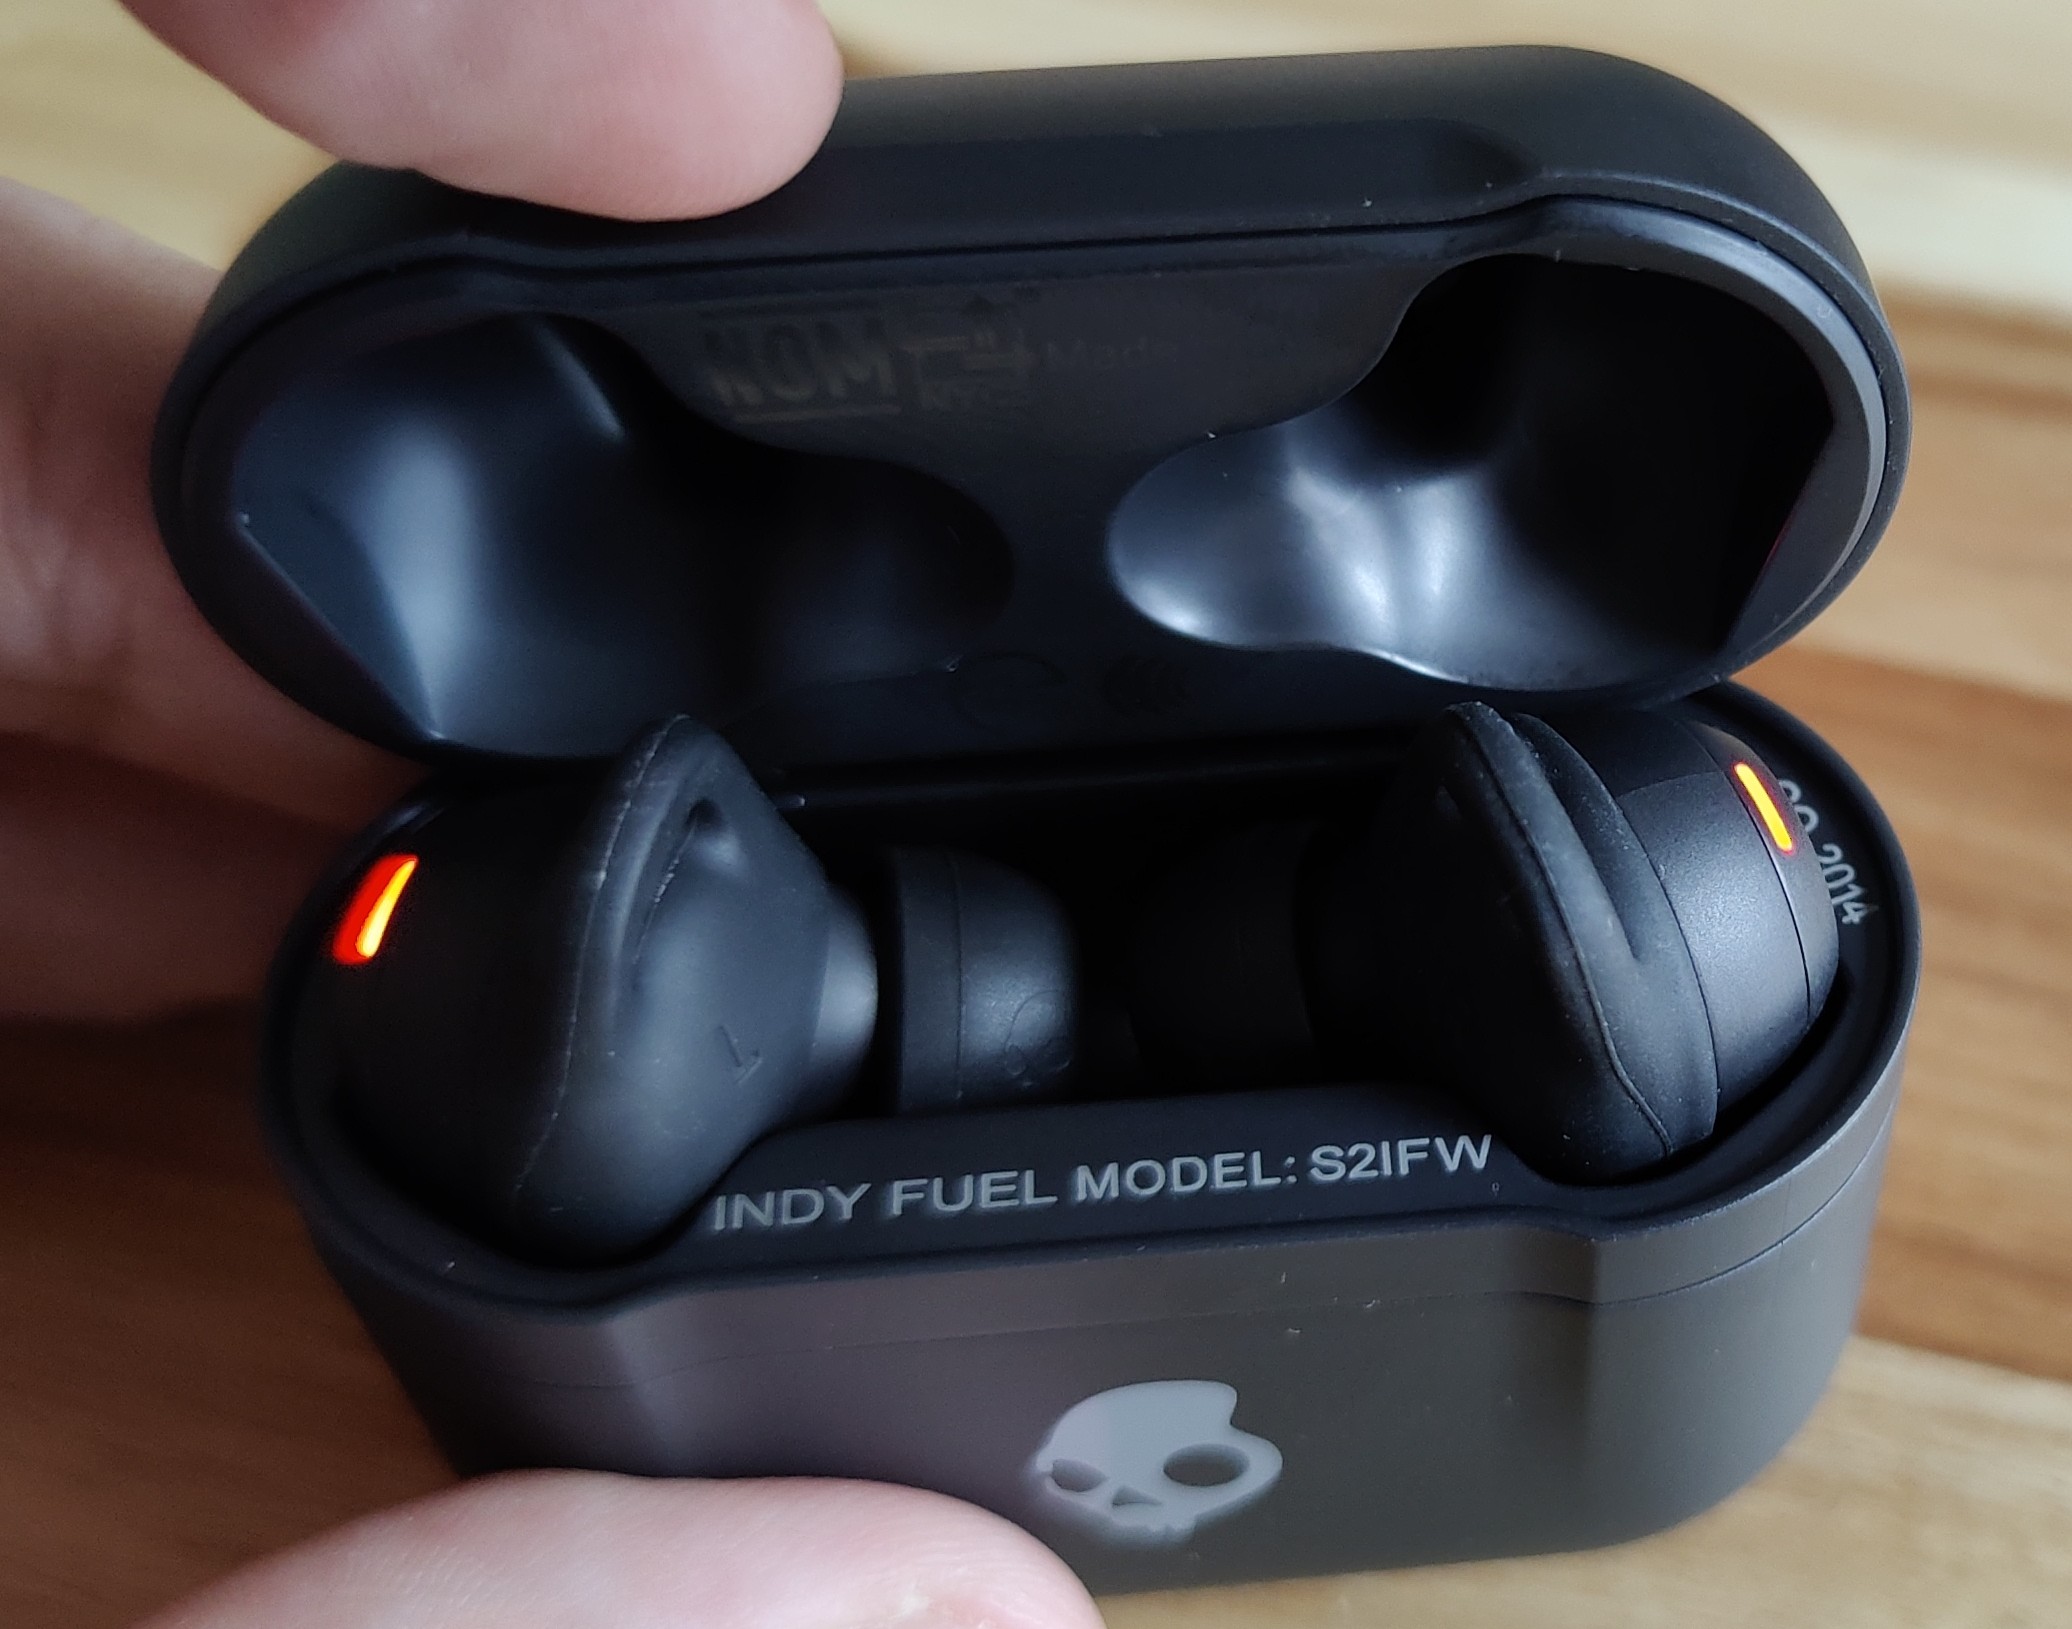 Skullcandy Indy Fuel Truly Wireless: Main Discussion